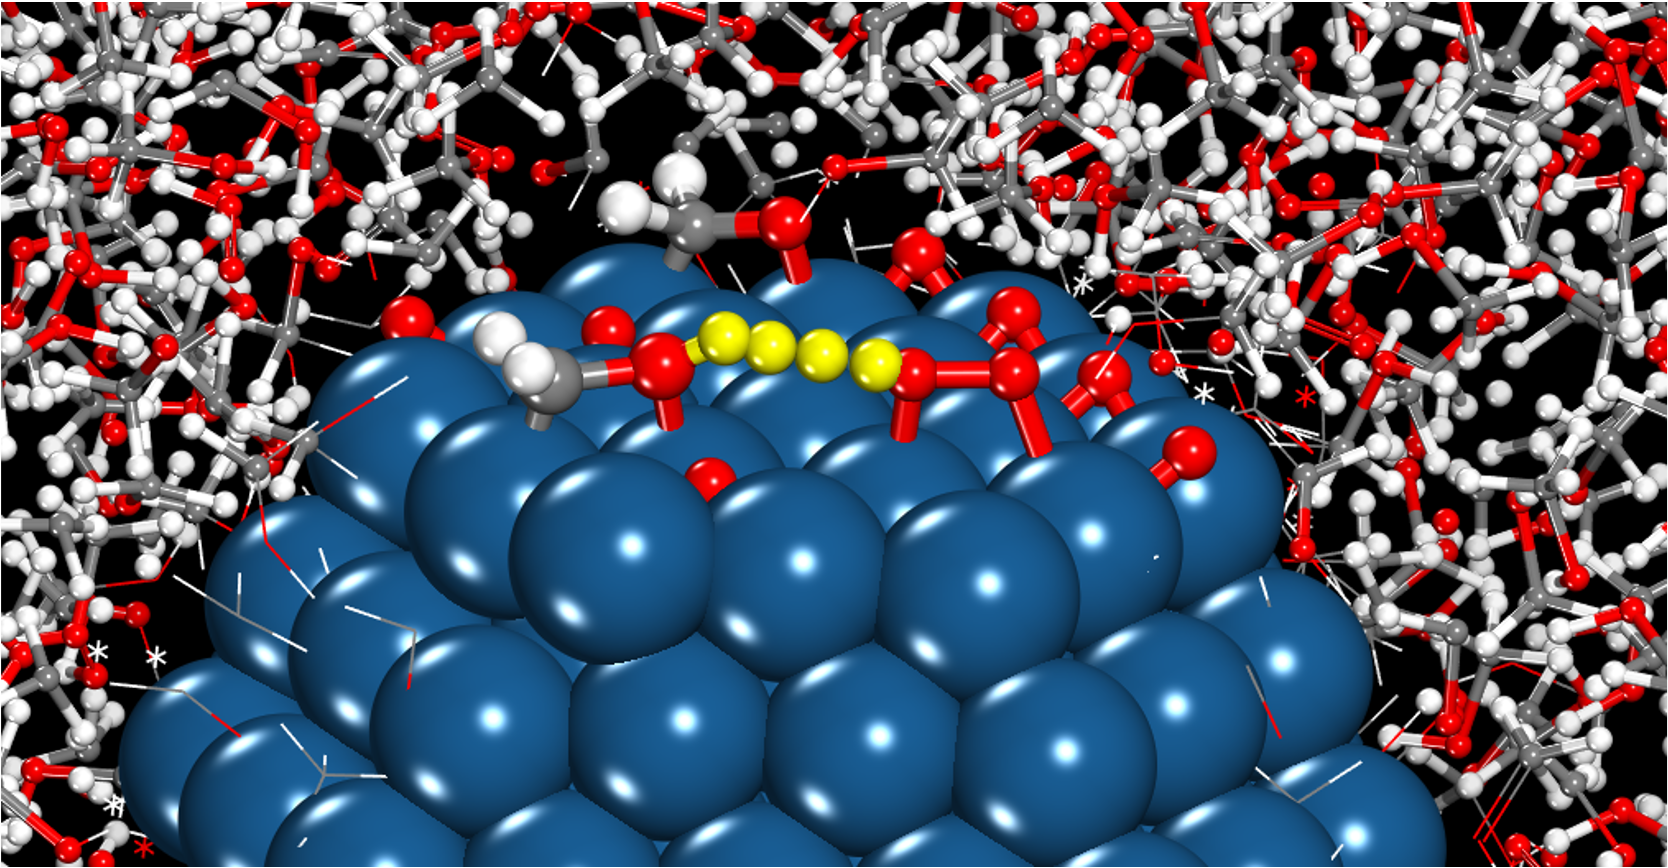 This illustration shows the structures of the hydroxymethyl mediator on the palladium nanoparticle in methanol solution reacting (transferring a proton and electron) with adsorbed oxygen molecule. Credit: Neurock Group, University of Minnesota